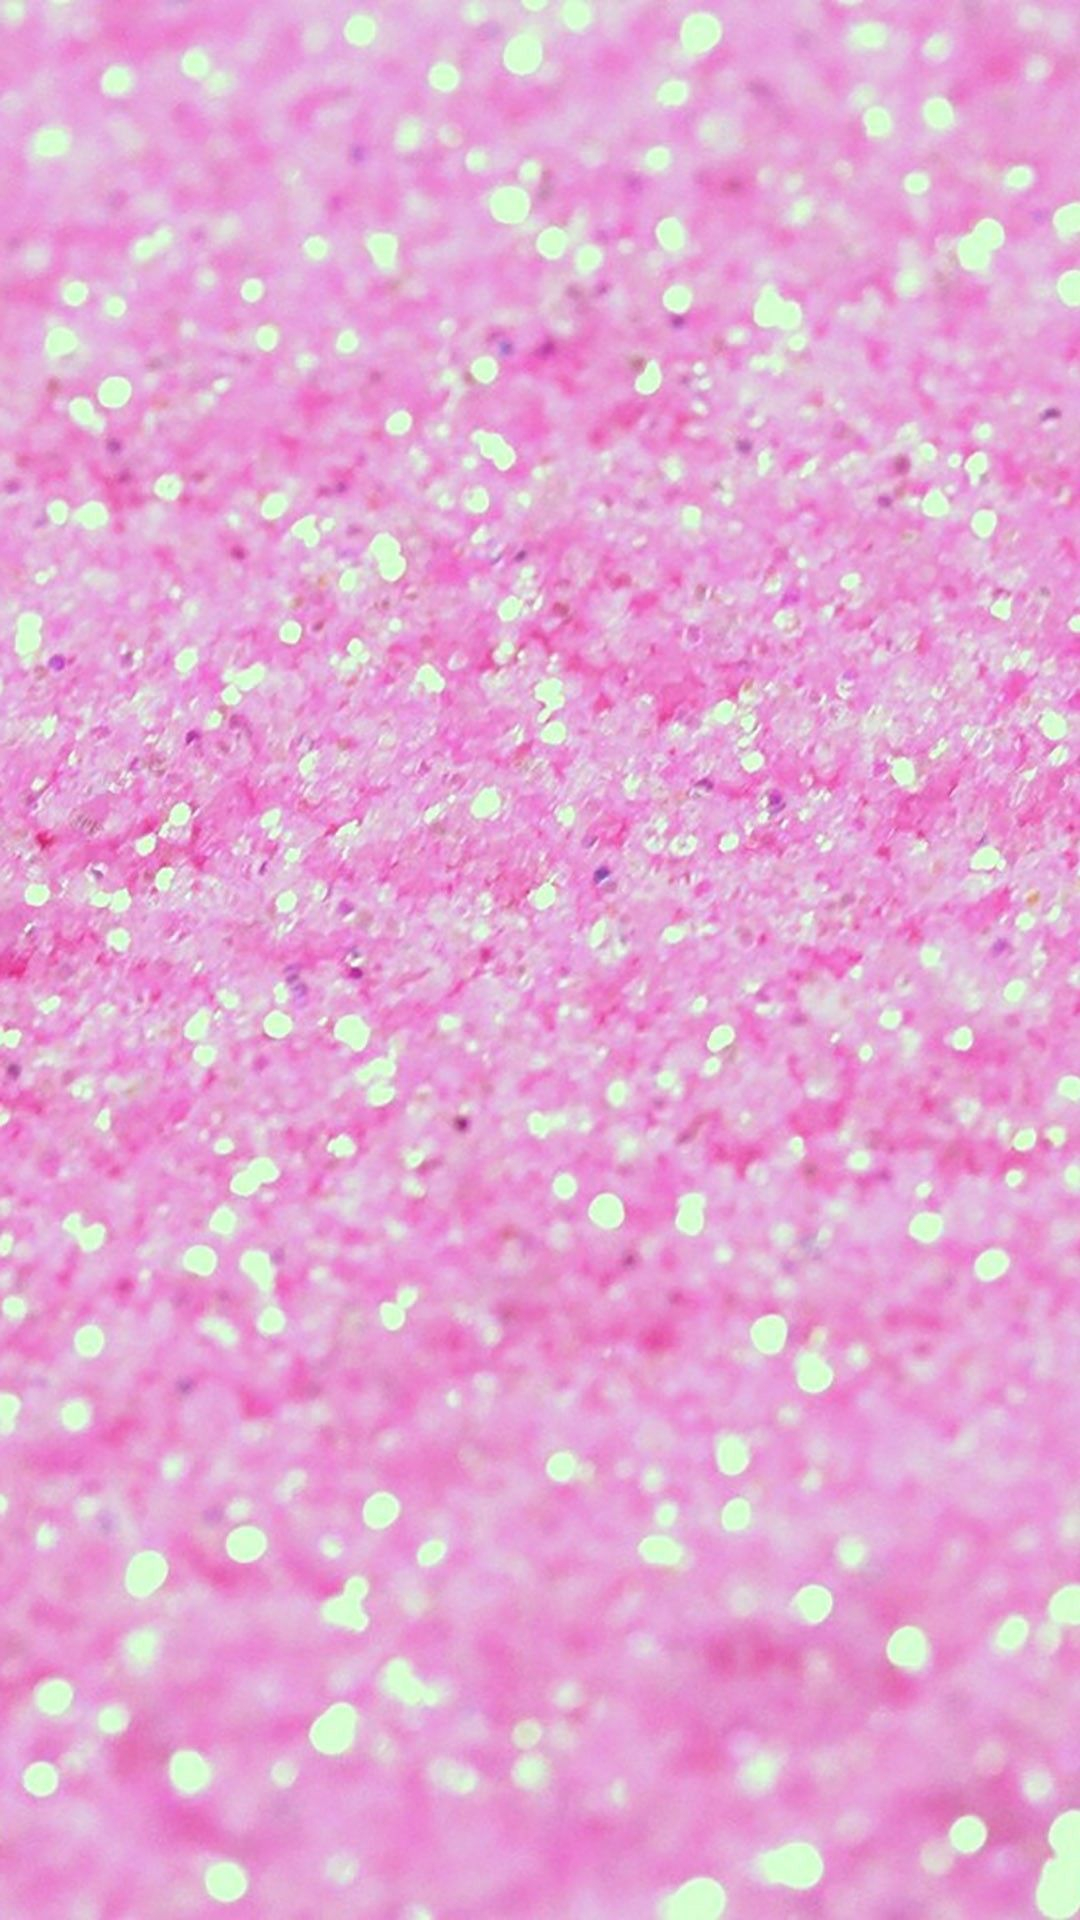 1080x1920 Pin by C Charbs on glitter,shine,sparkles,shimmer,holo,atheistic,holo | Pink sparkle background, Pink sparkle wallpaper, Pink wallpaper light